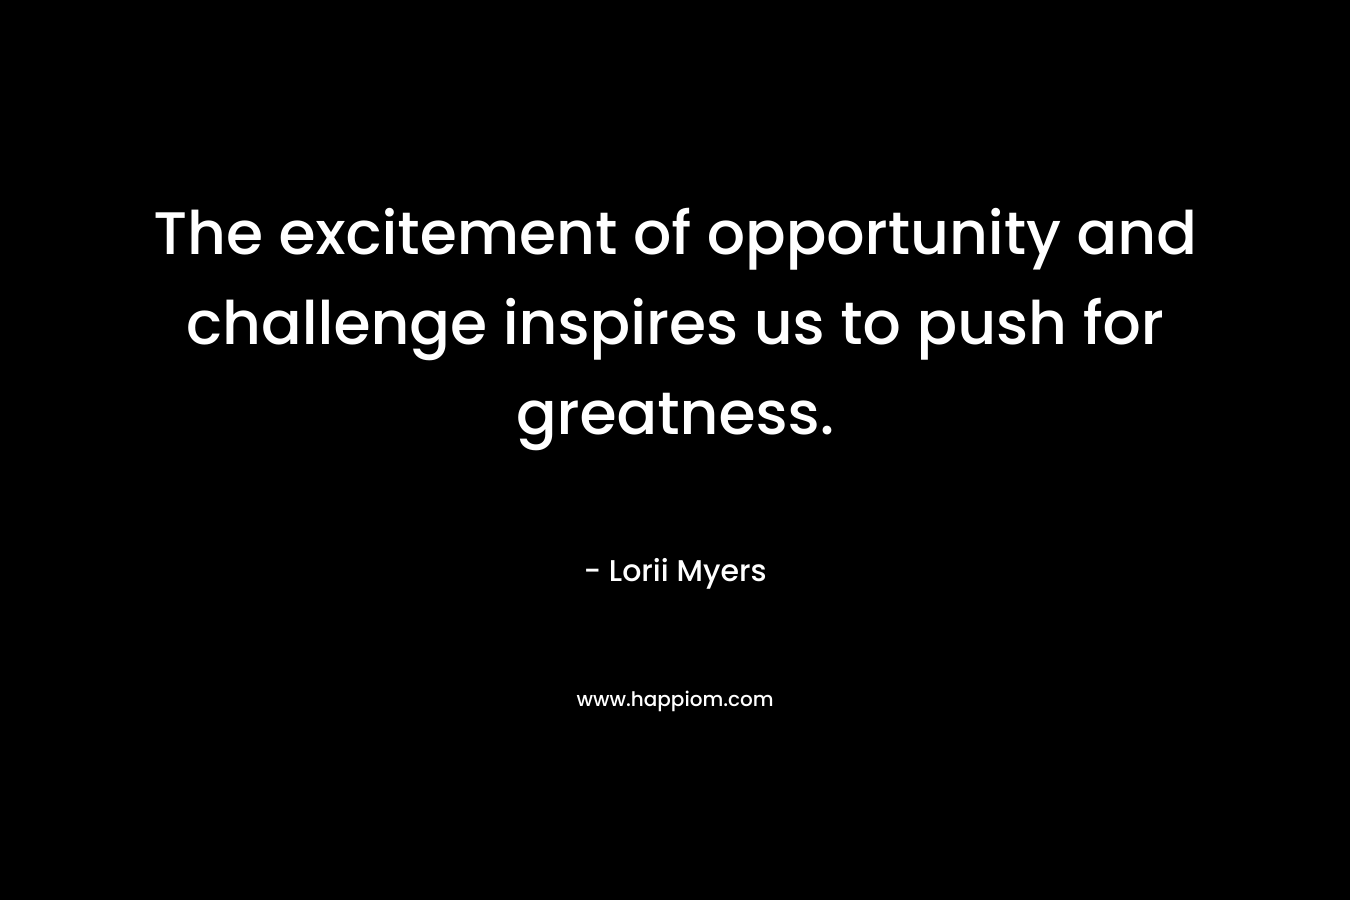 The excitement of opportunity and challenge inspires us to push for greatness. – Lorii Myers